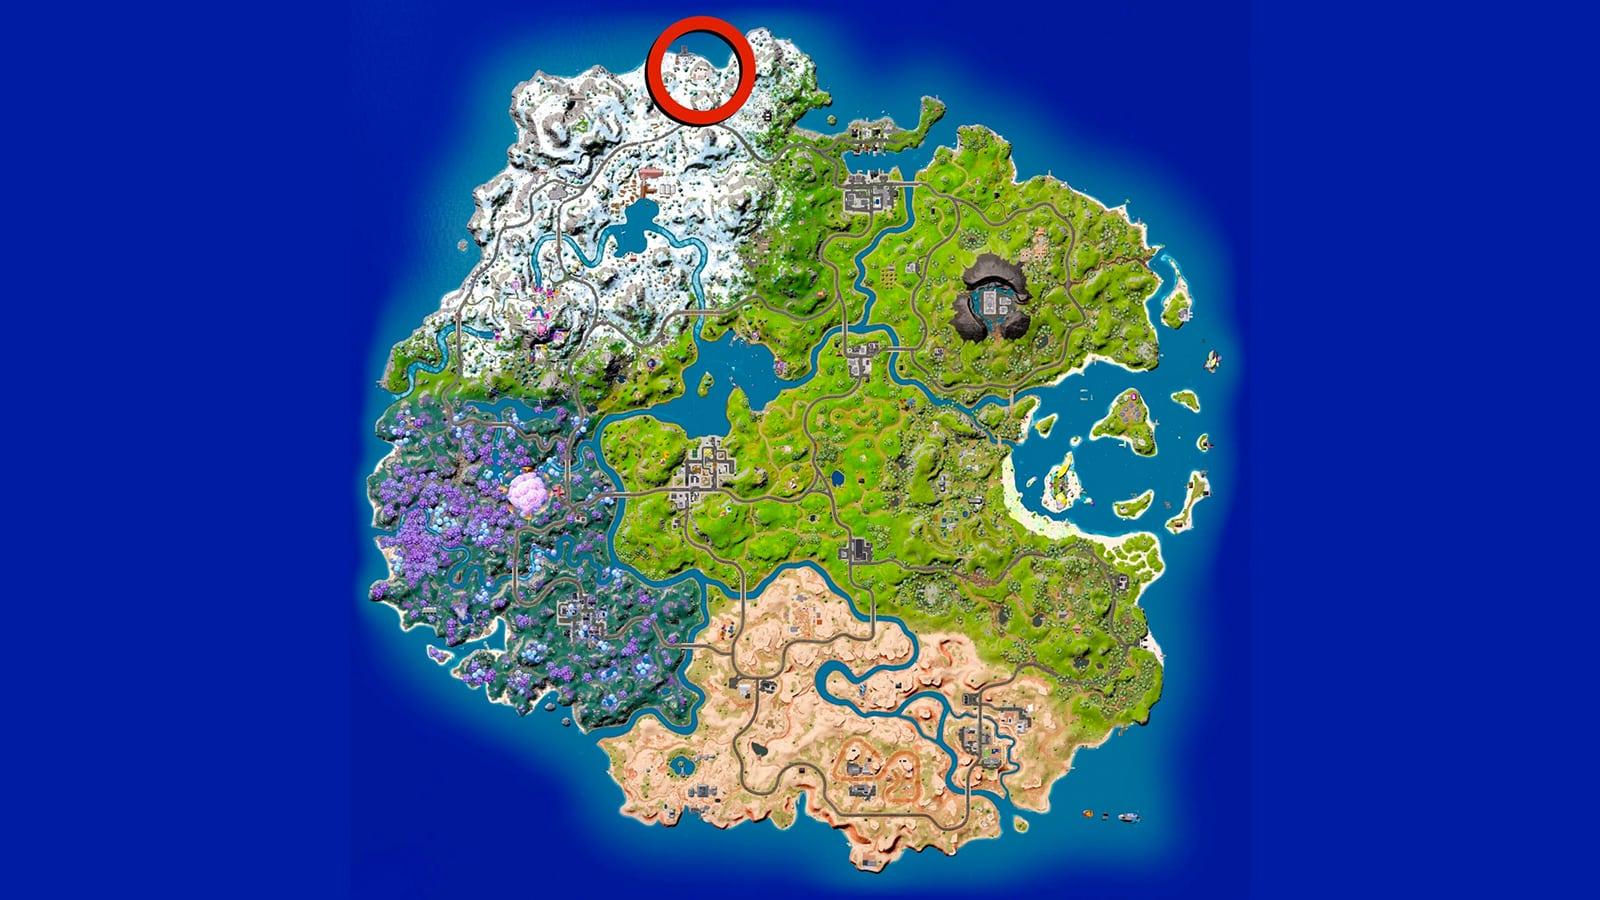 Ripsaw Launcher locations on the Fortnite map